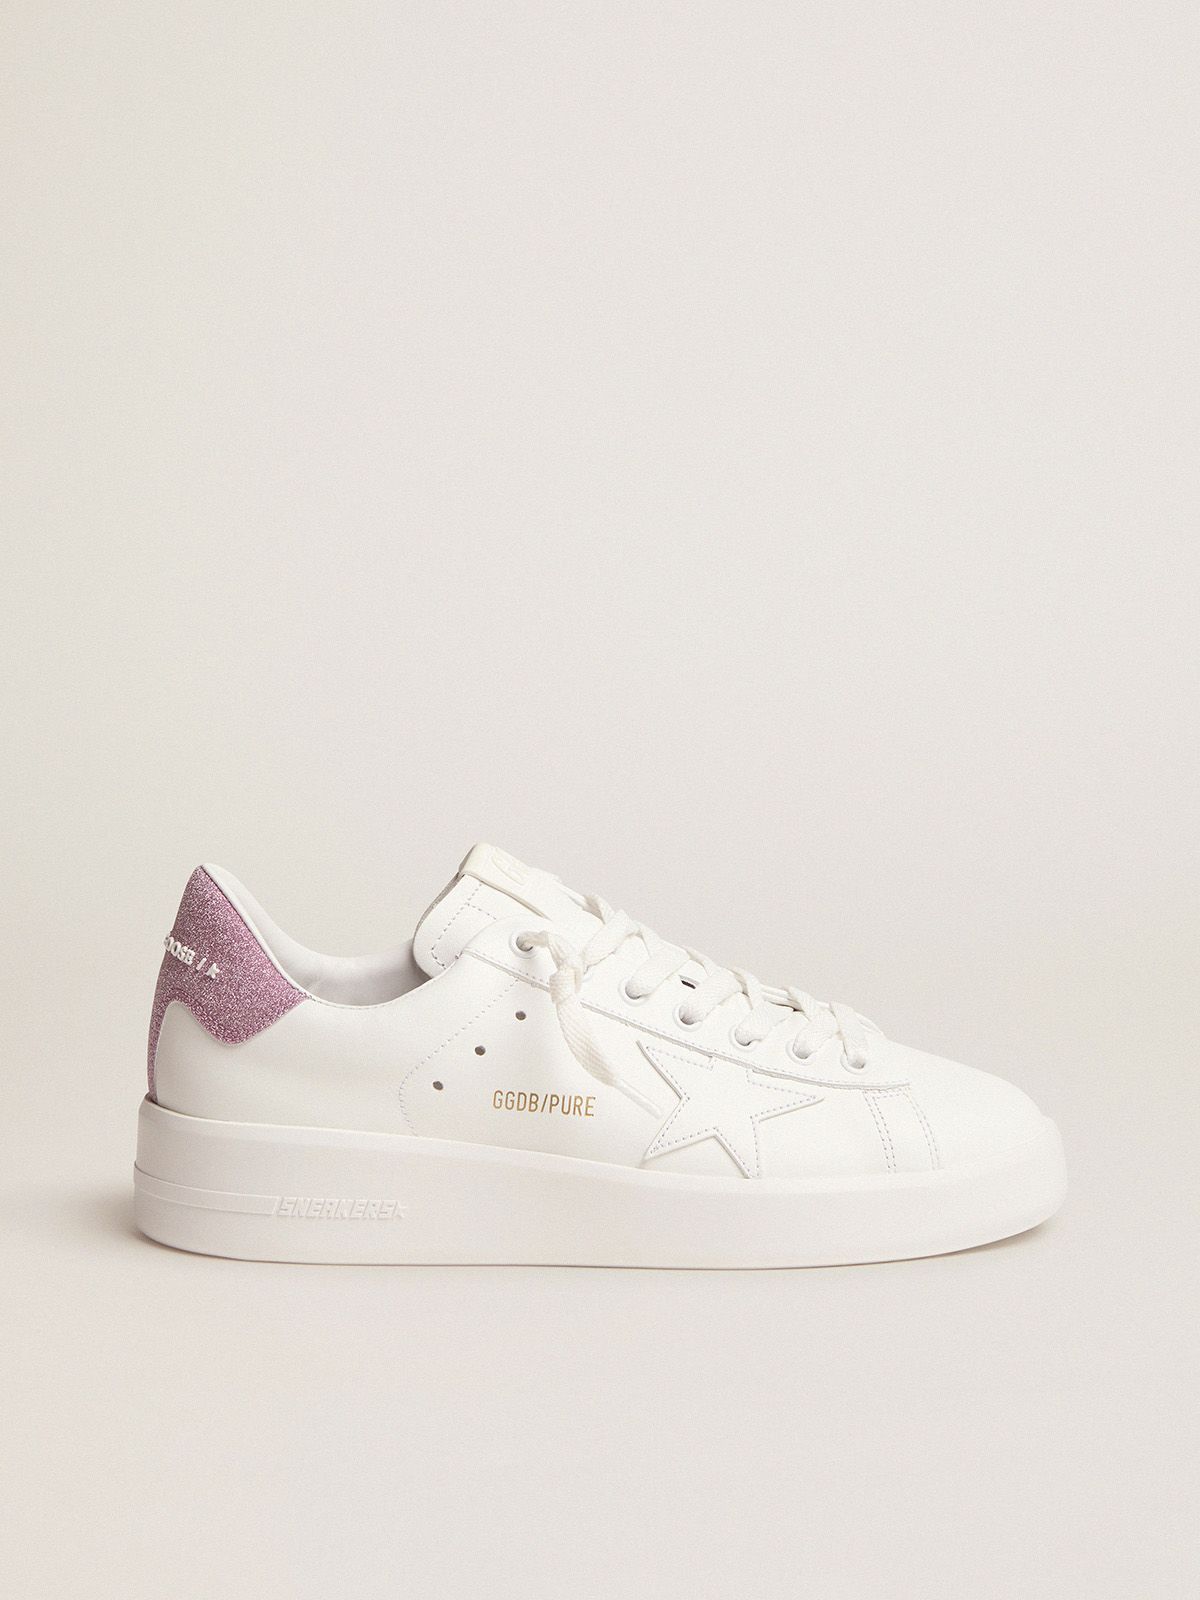 golden goose tab in white Purestar heel sneakers with leather pink glitter